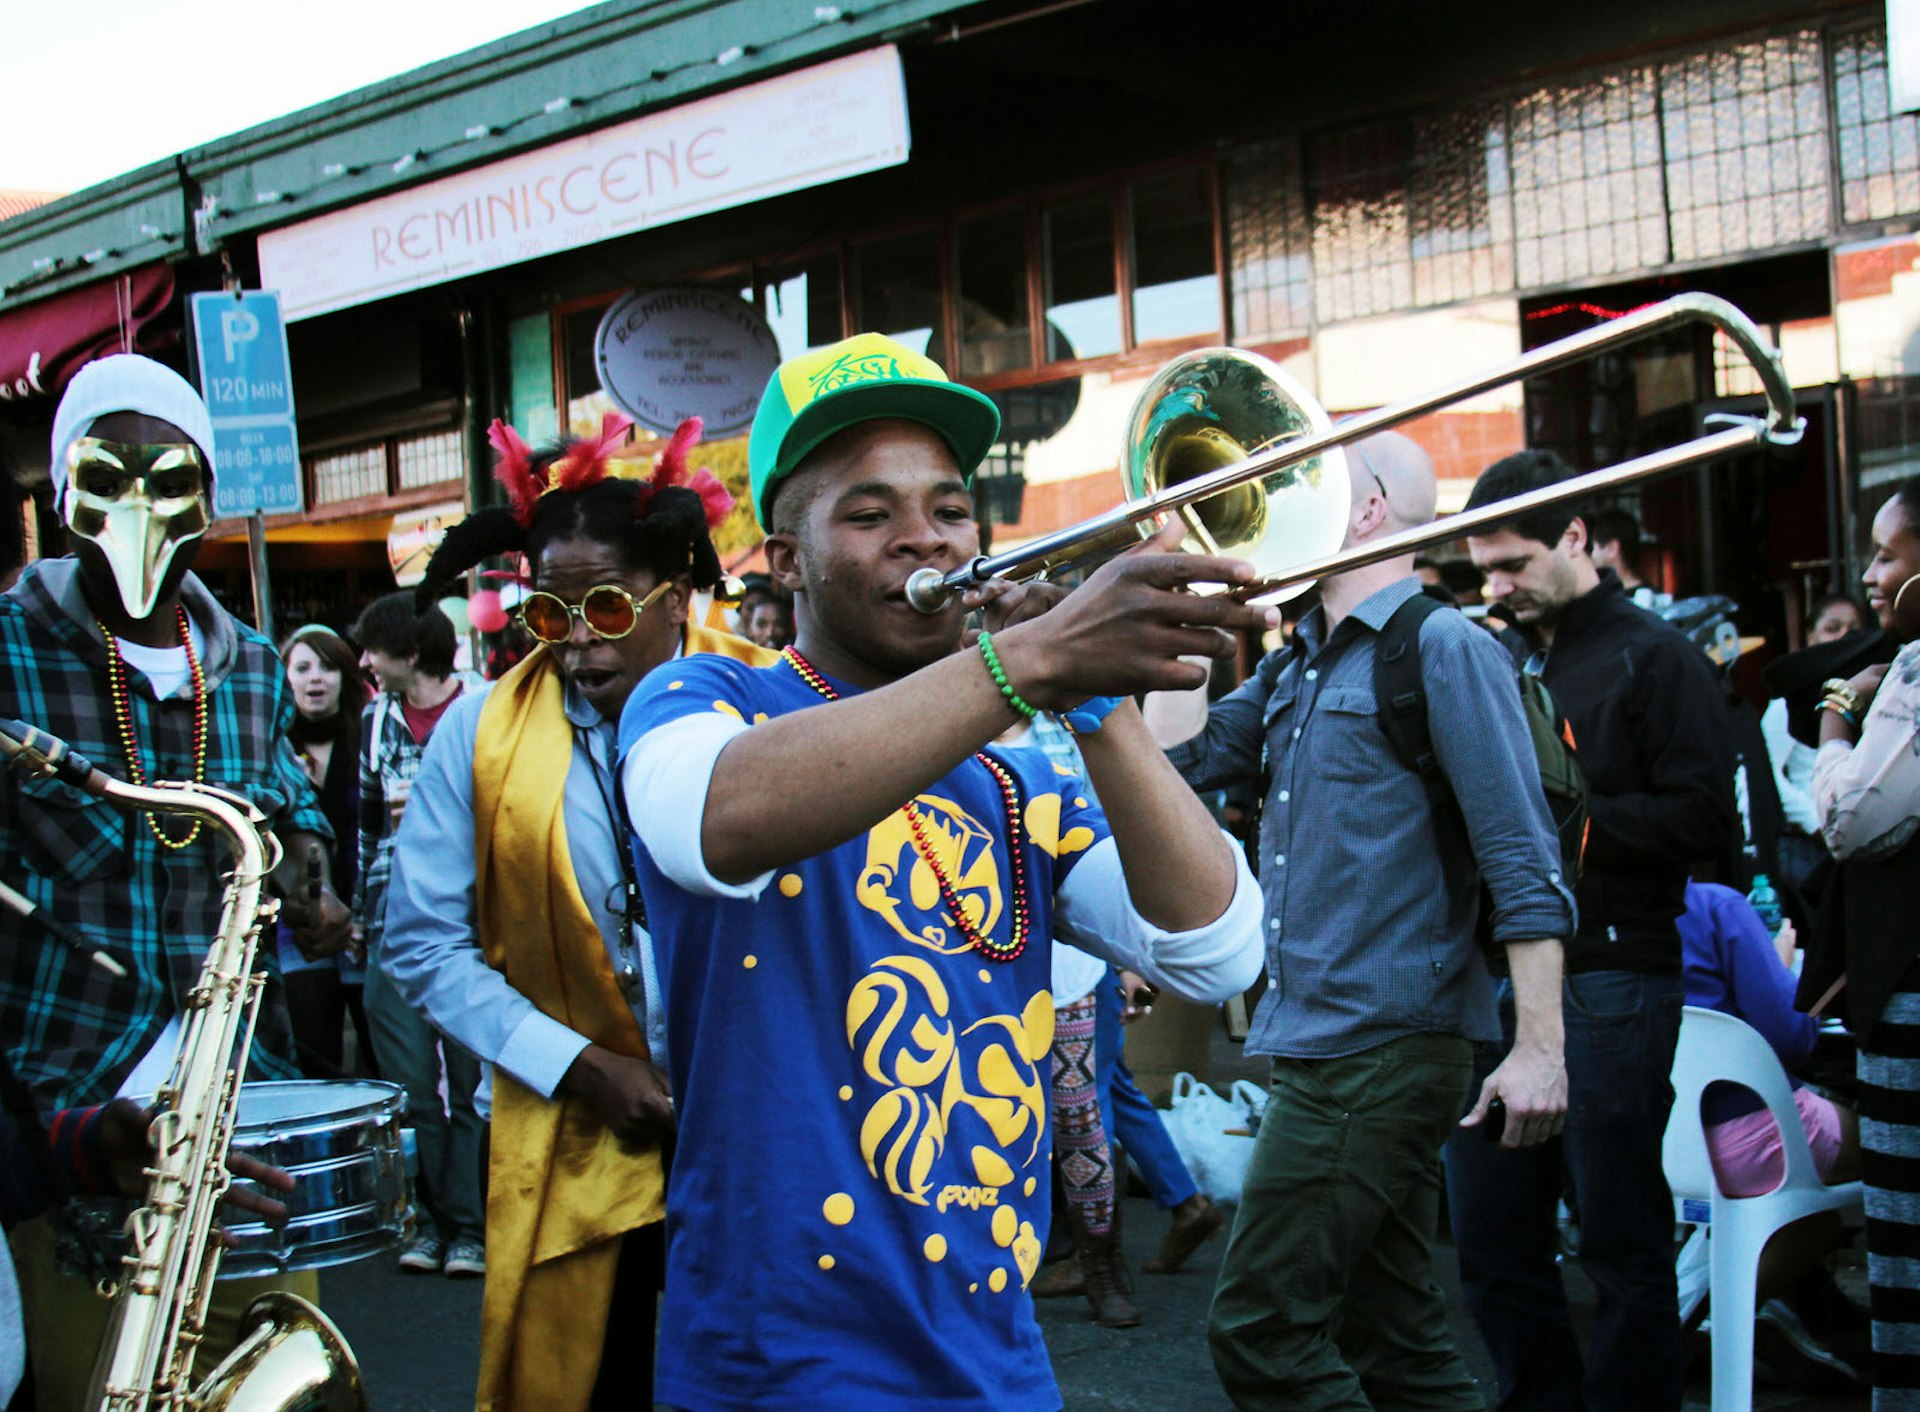 Johannesburg June - A young man with a bright green baseball hat and blue t-shirt plays a trombone in the street with other revellers, some donning Venetian masks, others feathers in their hair